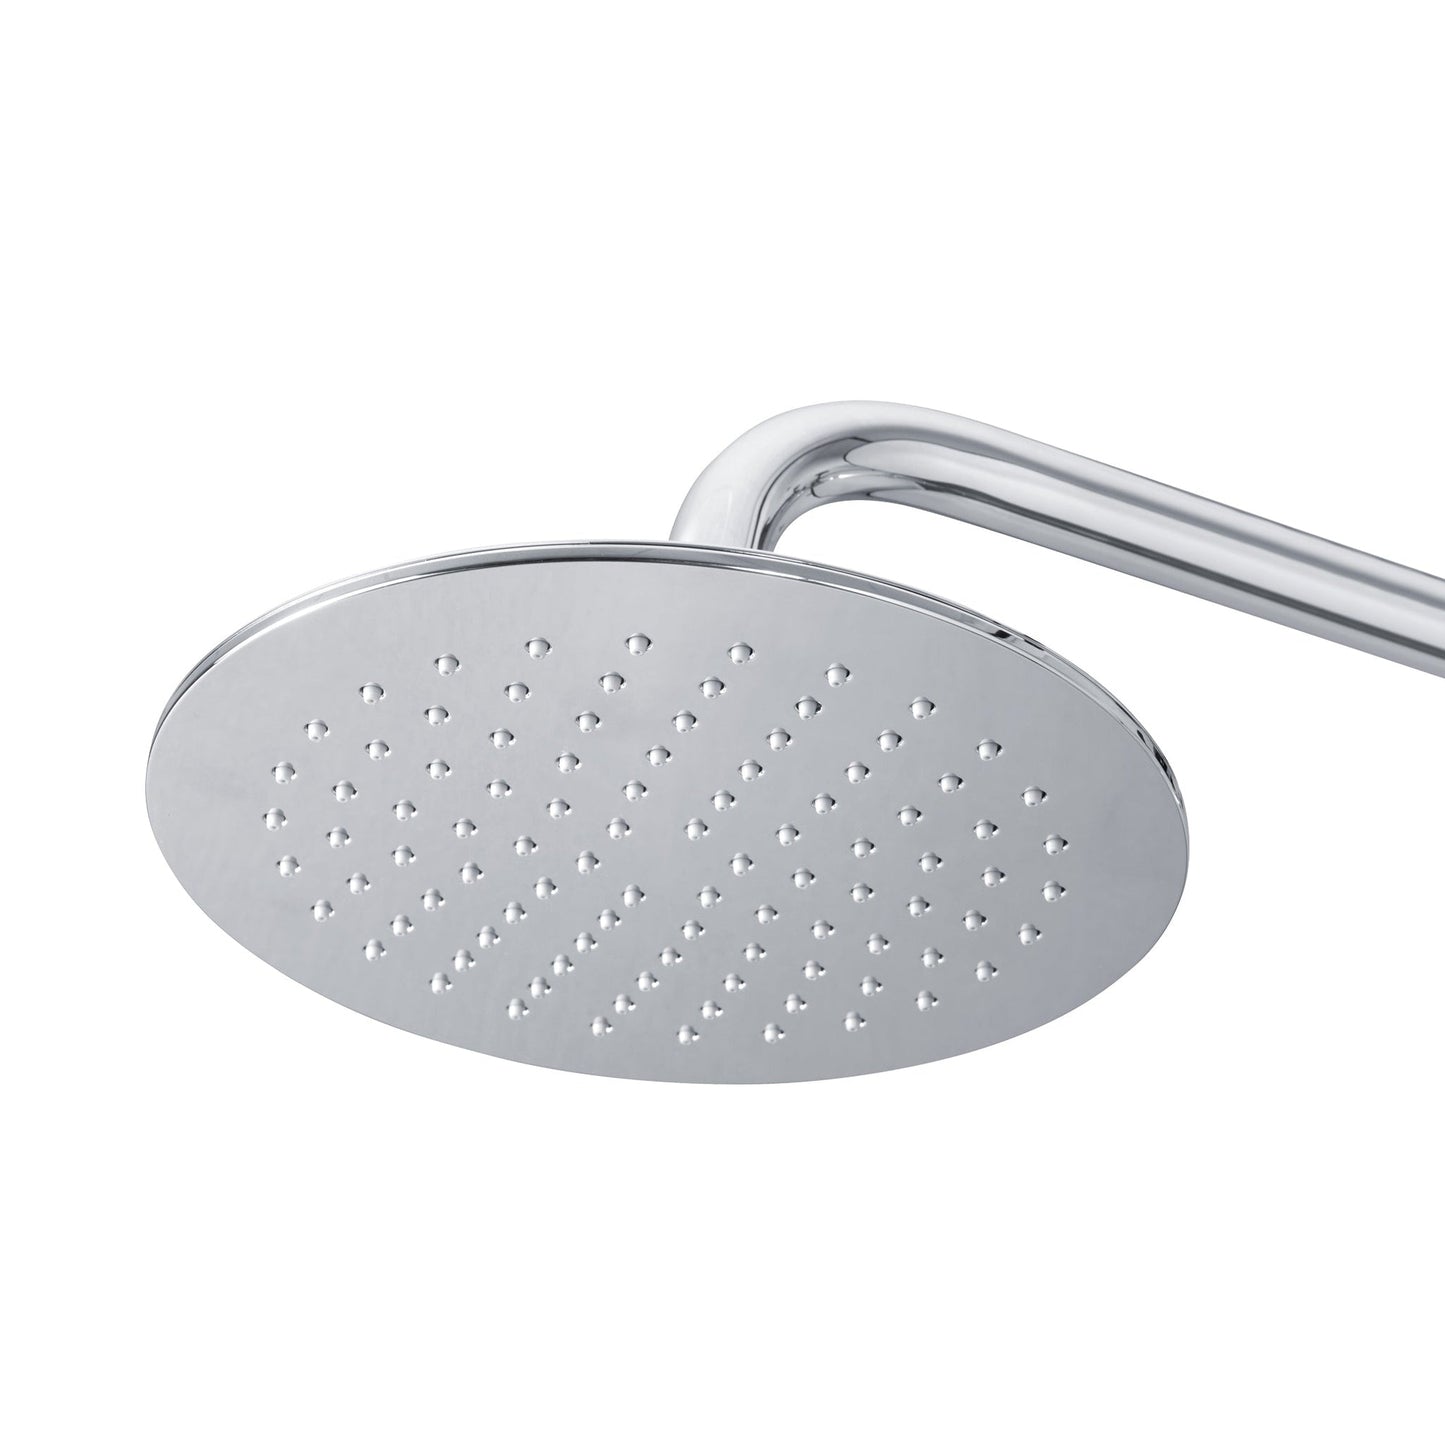 PULSE ShowerSpas Aquarius 2.5 GPM Shower System in Chrome Finish With Rain Shower Head and Single Function Hand Shower